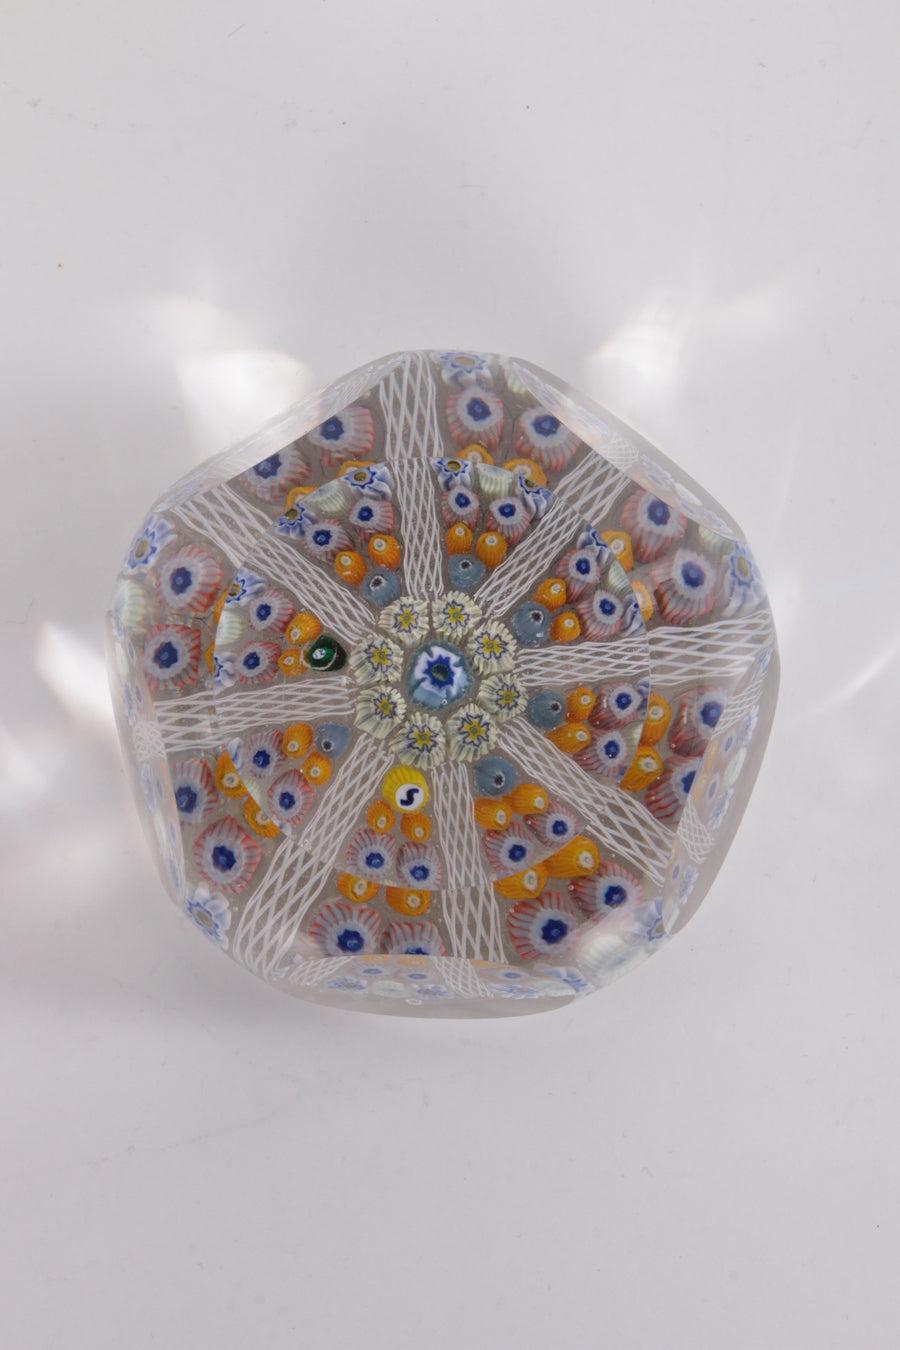 John Deacons Presse-papiers Millefiori with Yellow and White, 1960

Beautiful paperweight large white yellow 1960 by John Deacons.
Glass paperweight.

A paperweight is an object that can be placed on a desk on top of papers to prevent them from